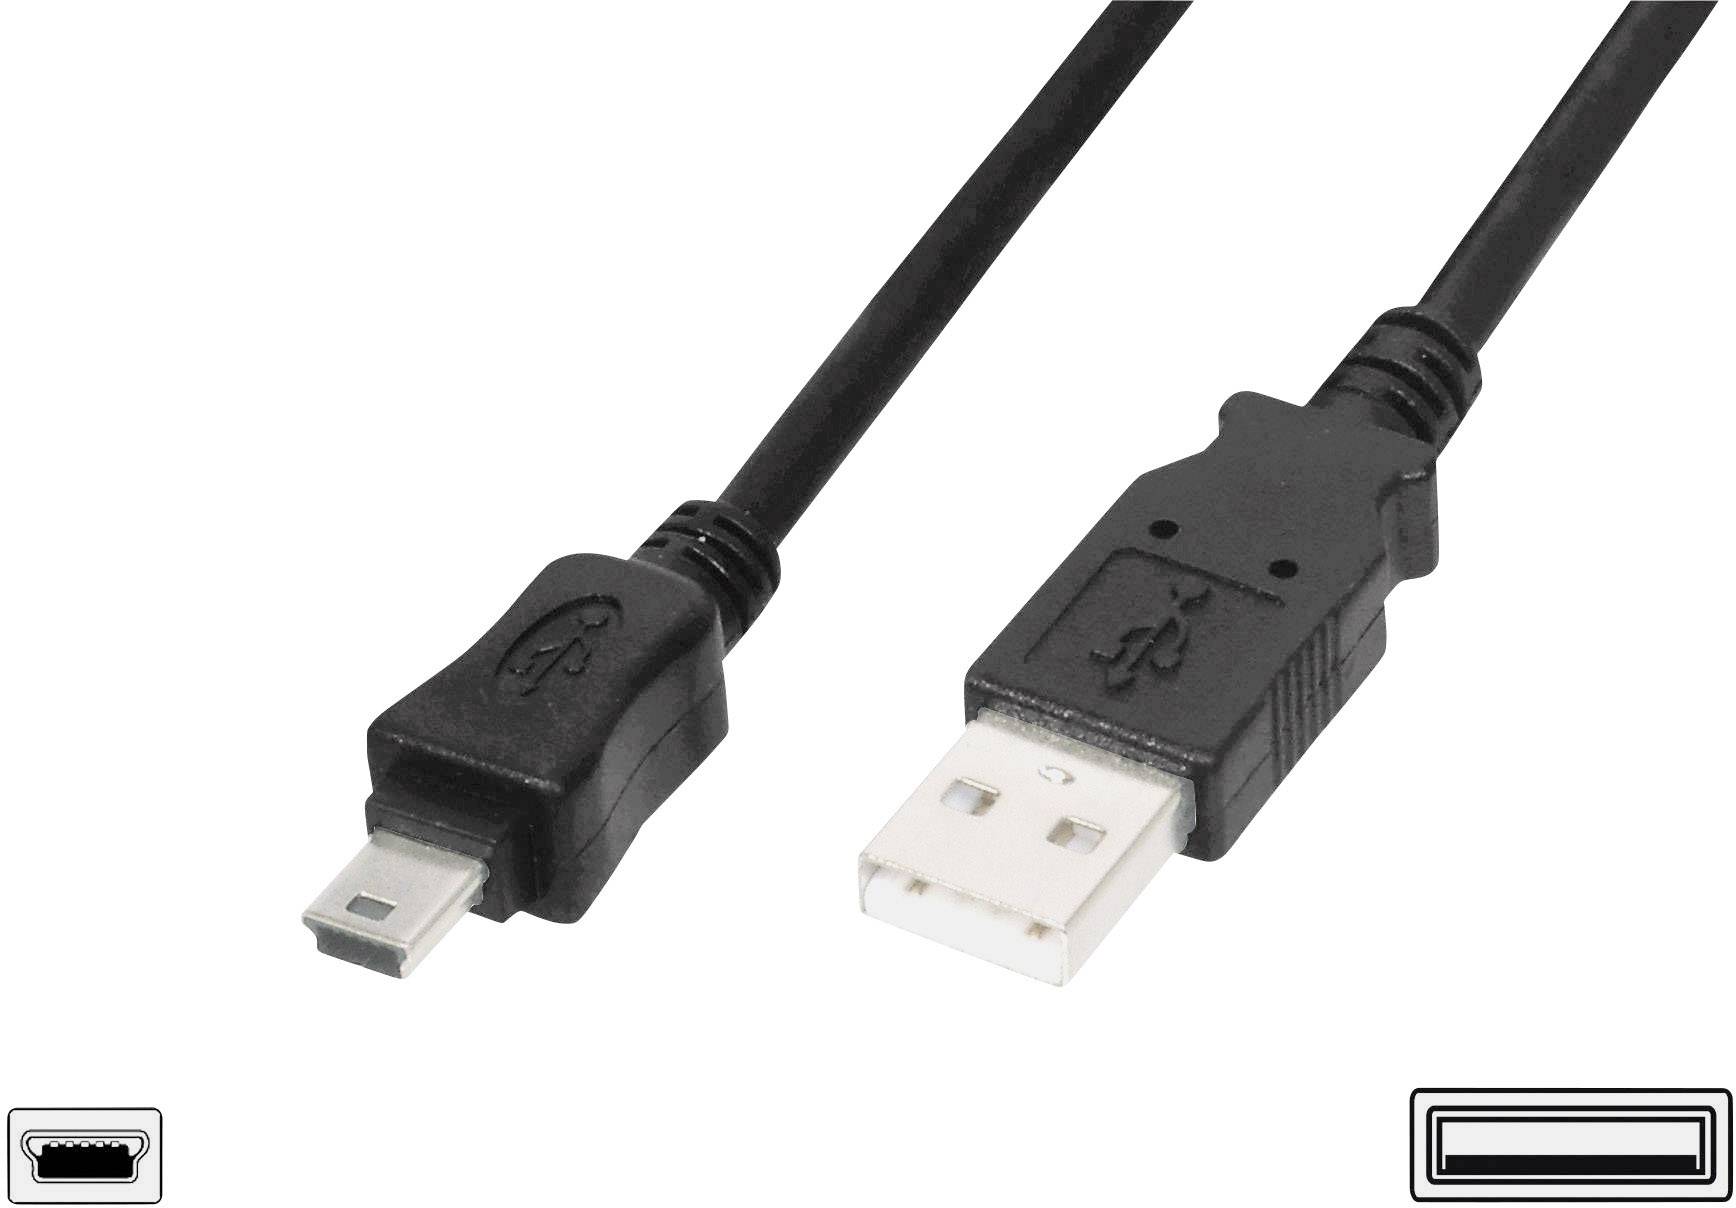 USB 2.0 CONNECTION CABLE A-B